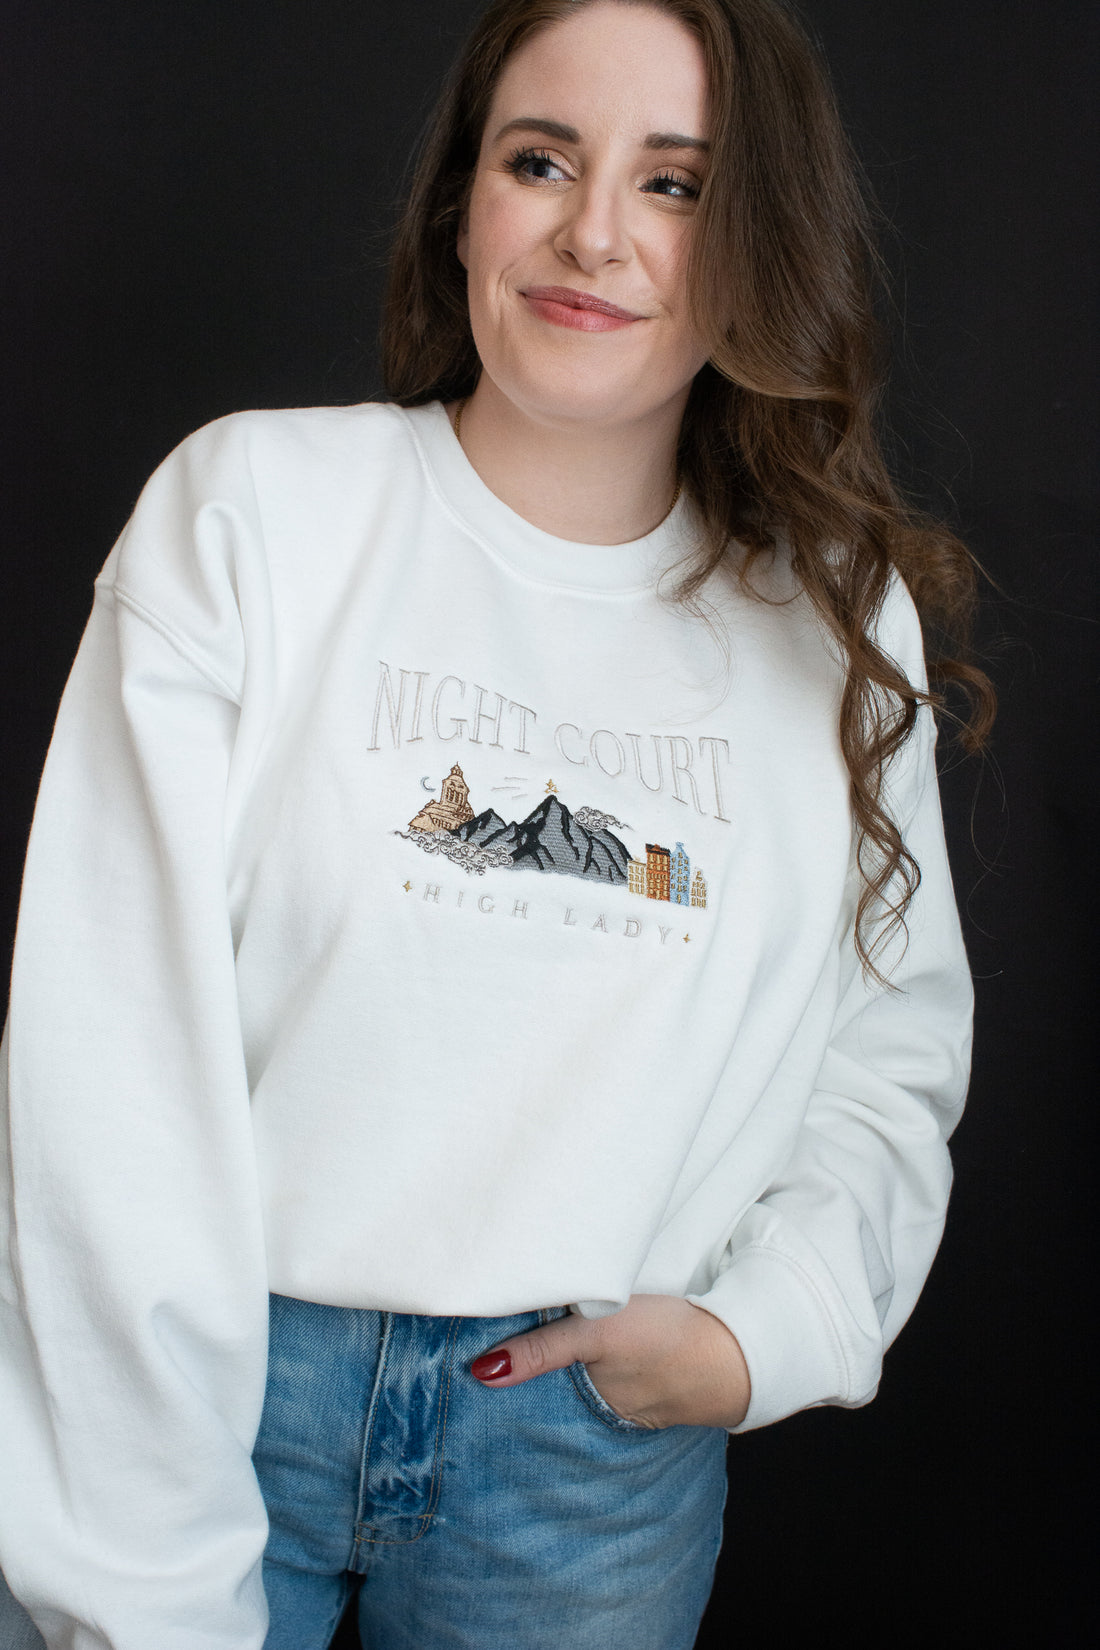 High Lady of the Night Court Crewneck